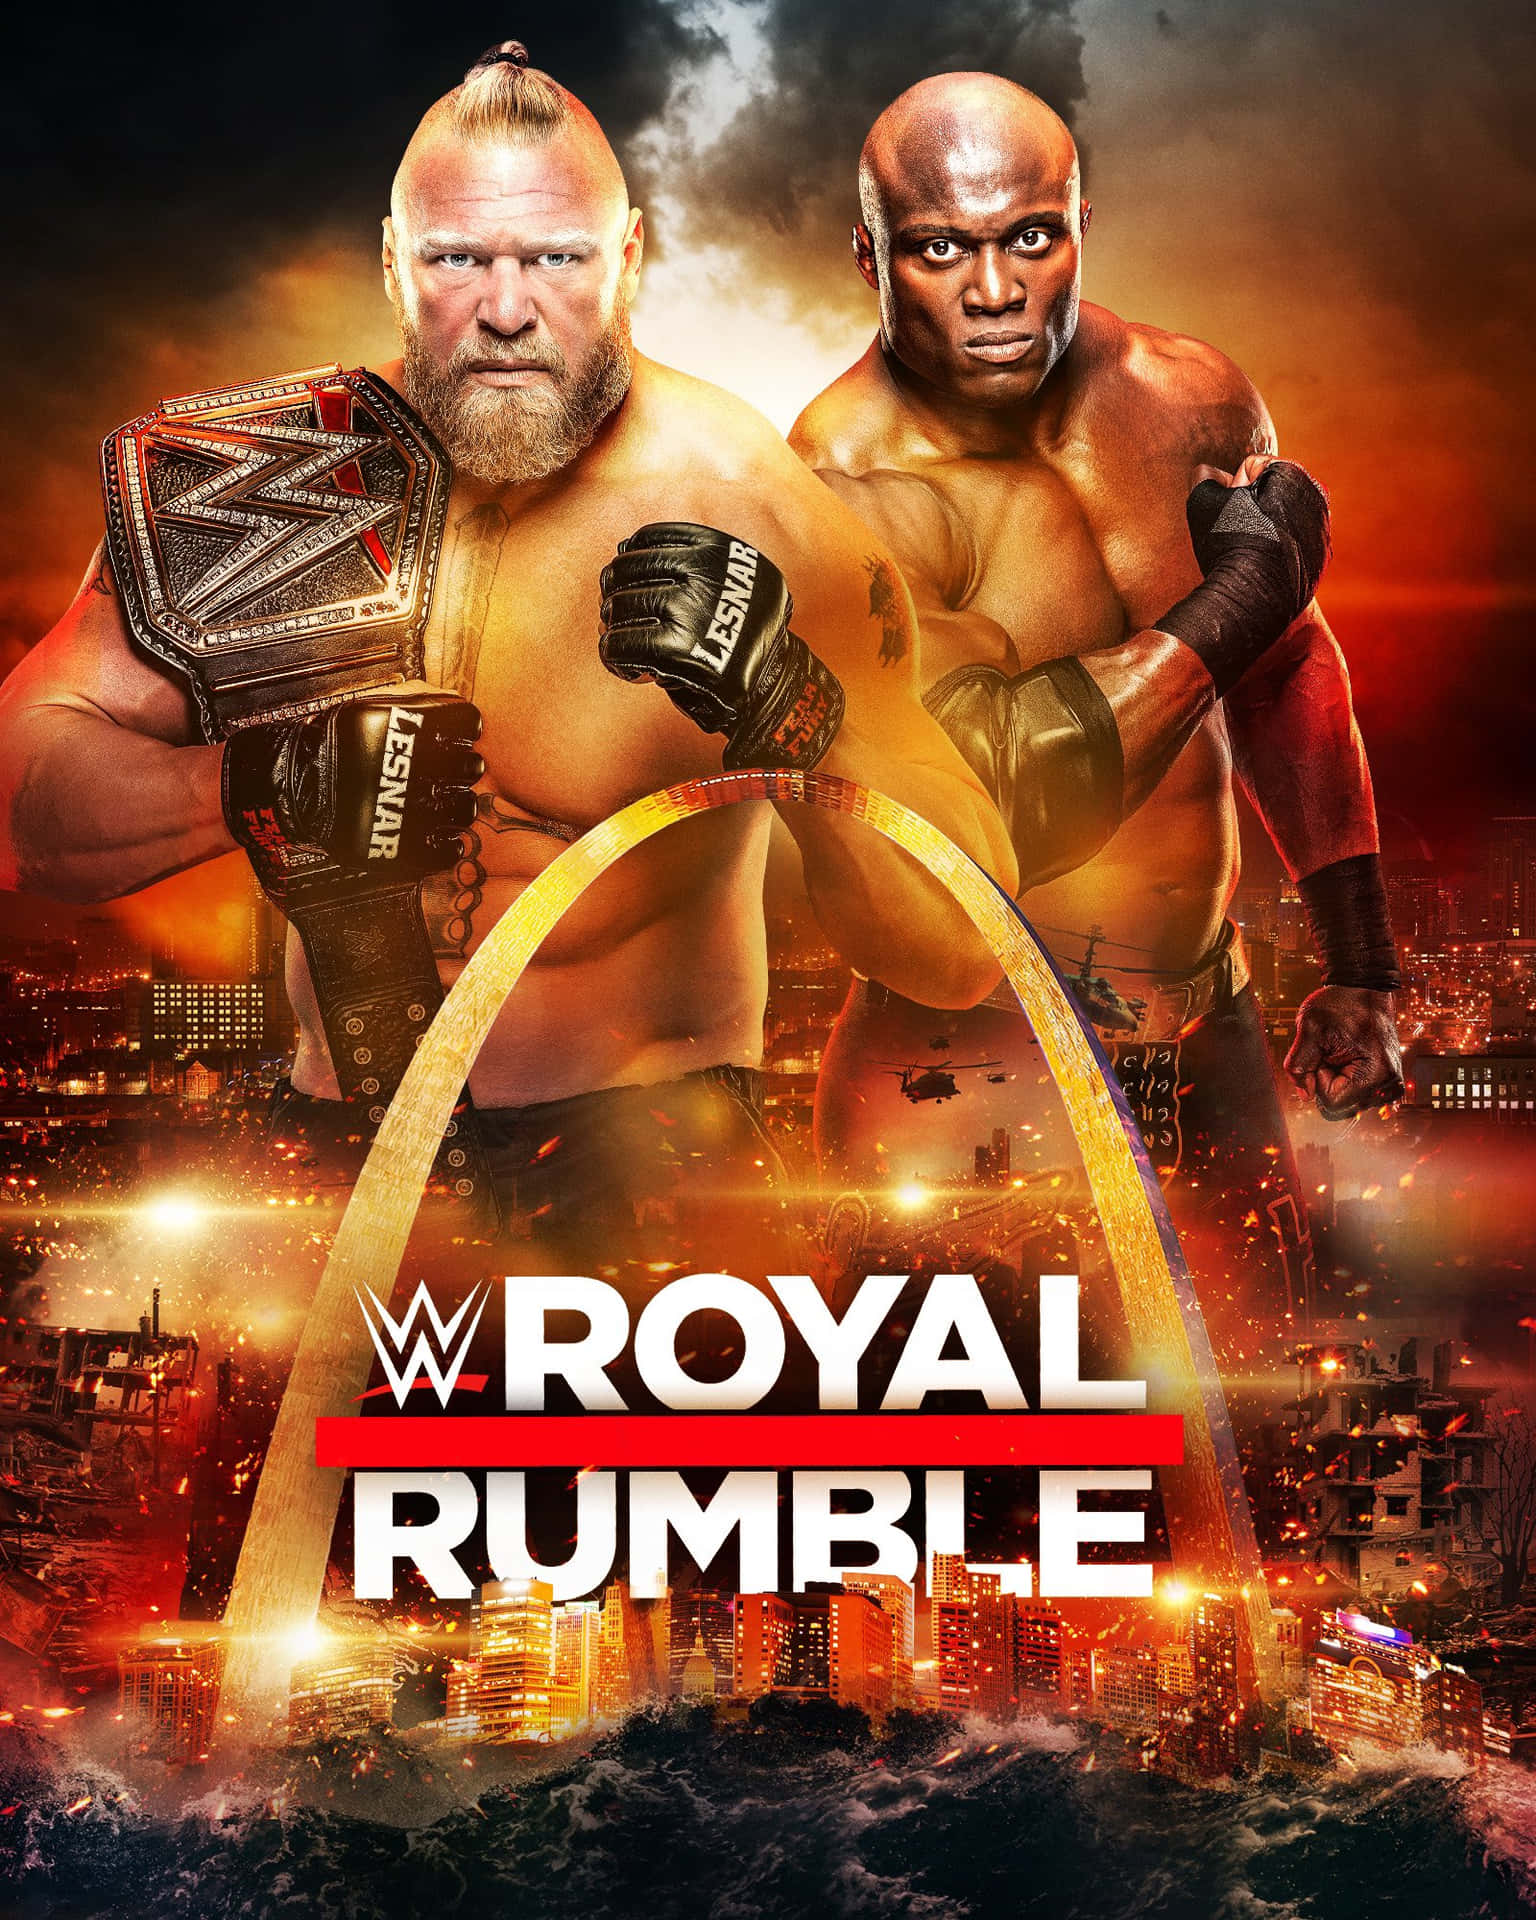 Poster Featuring Brock Lesnar And Bobby Lashley Wallpaper